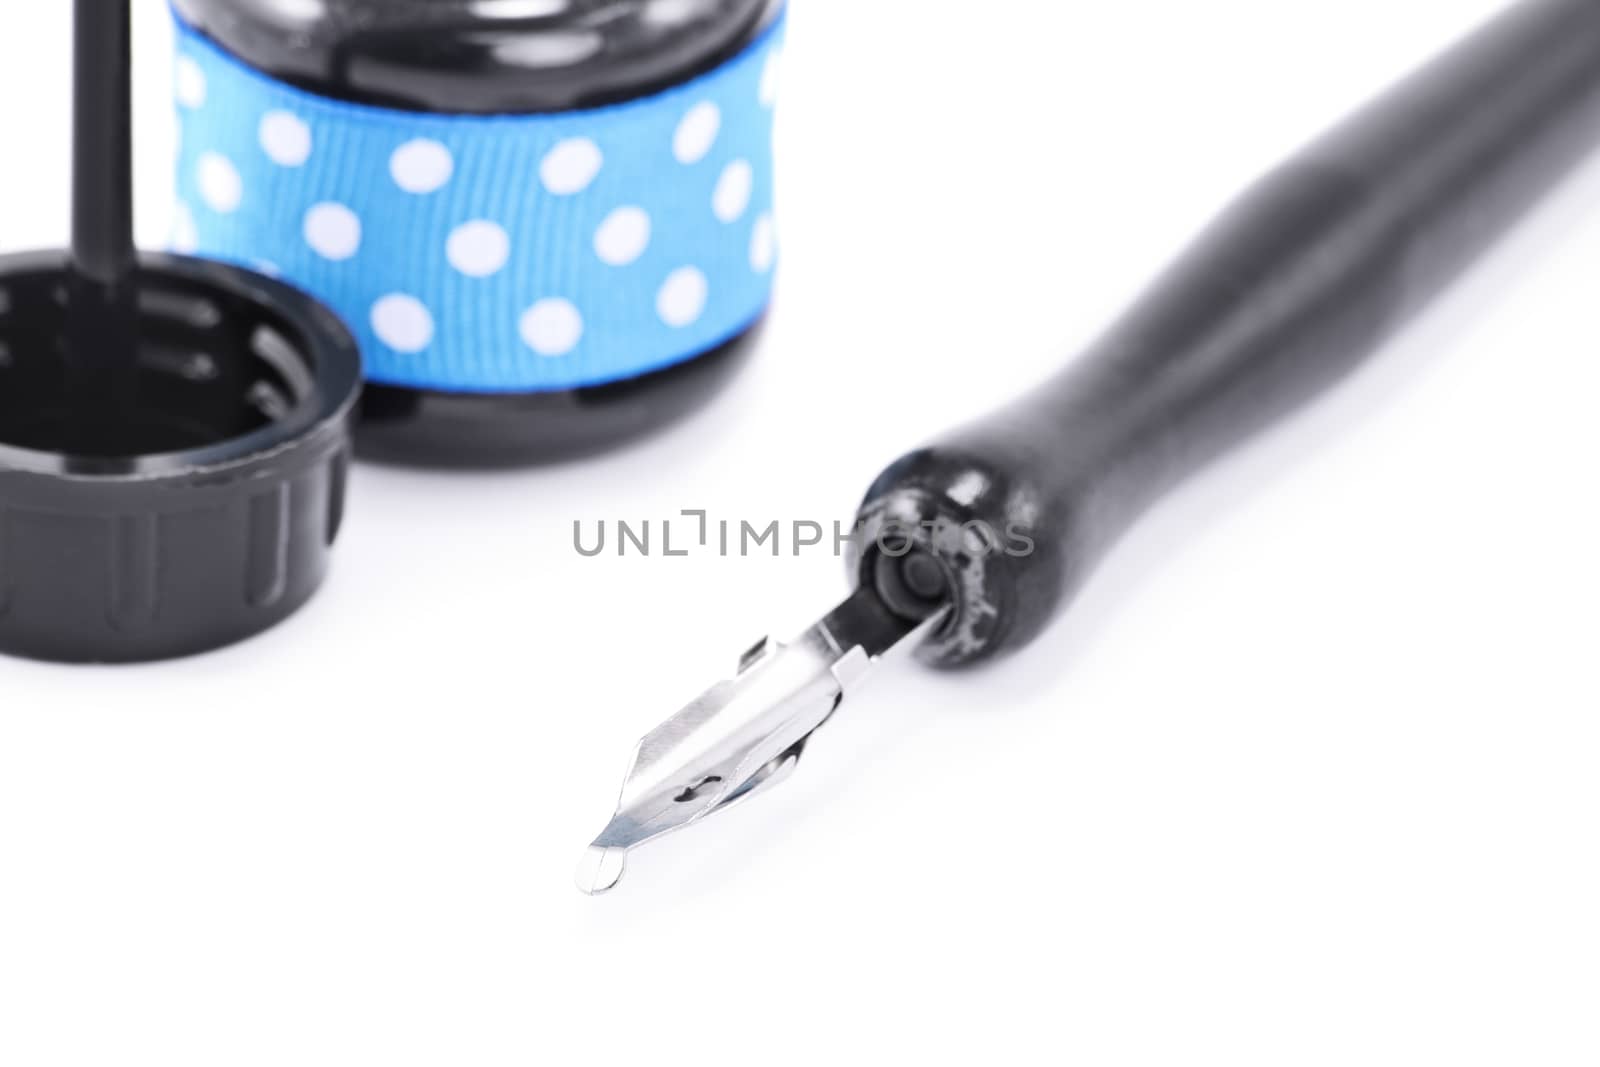 Close up shot of a dip pen and ink bottle, isolated on white background.